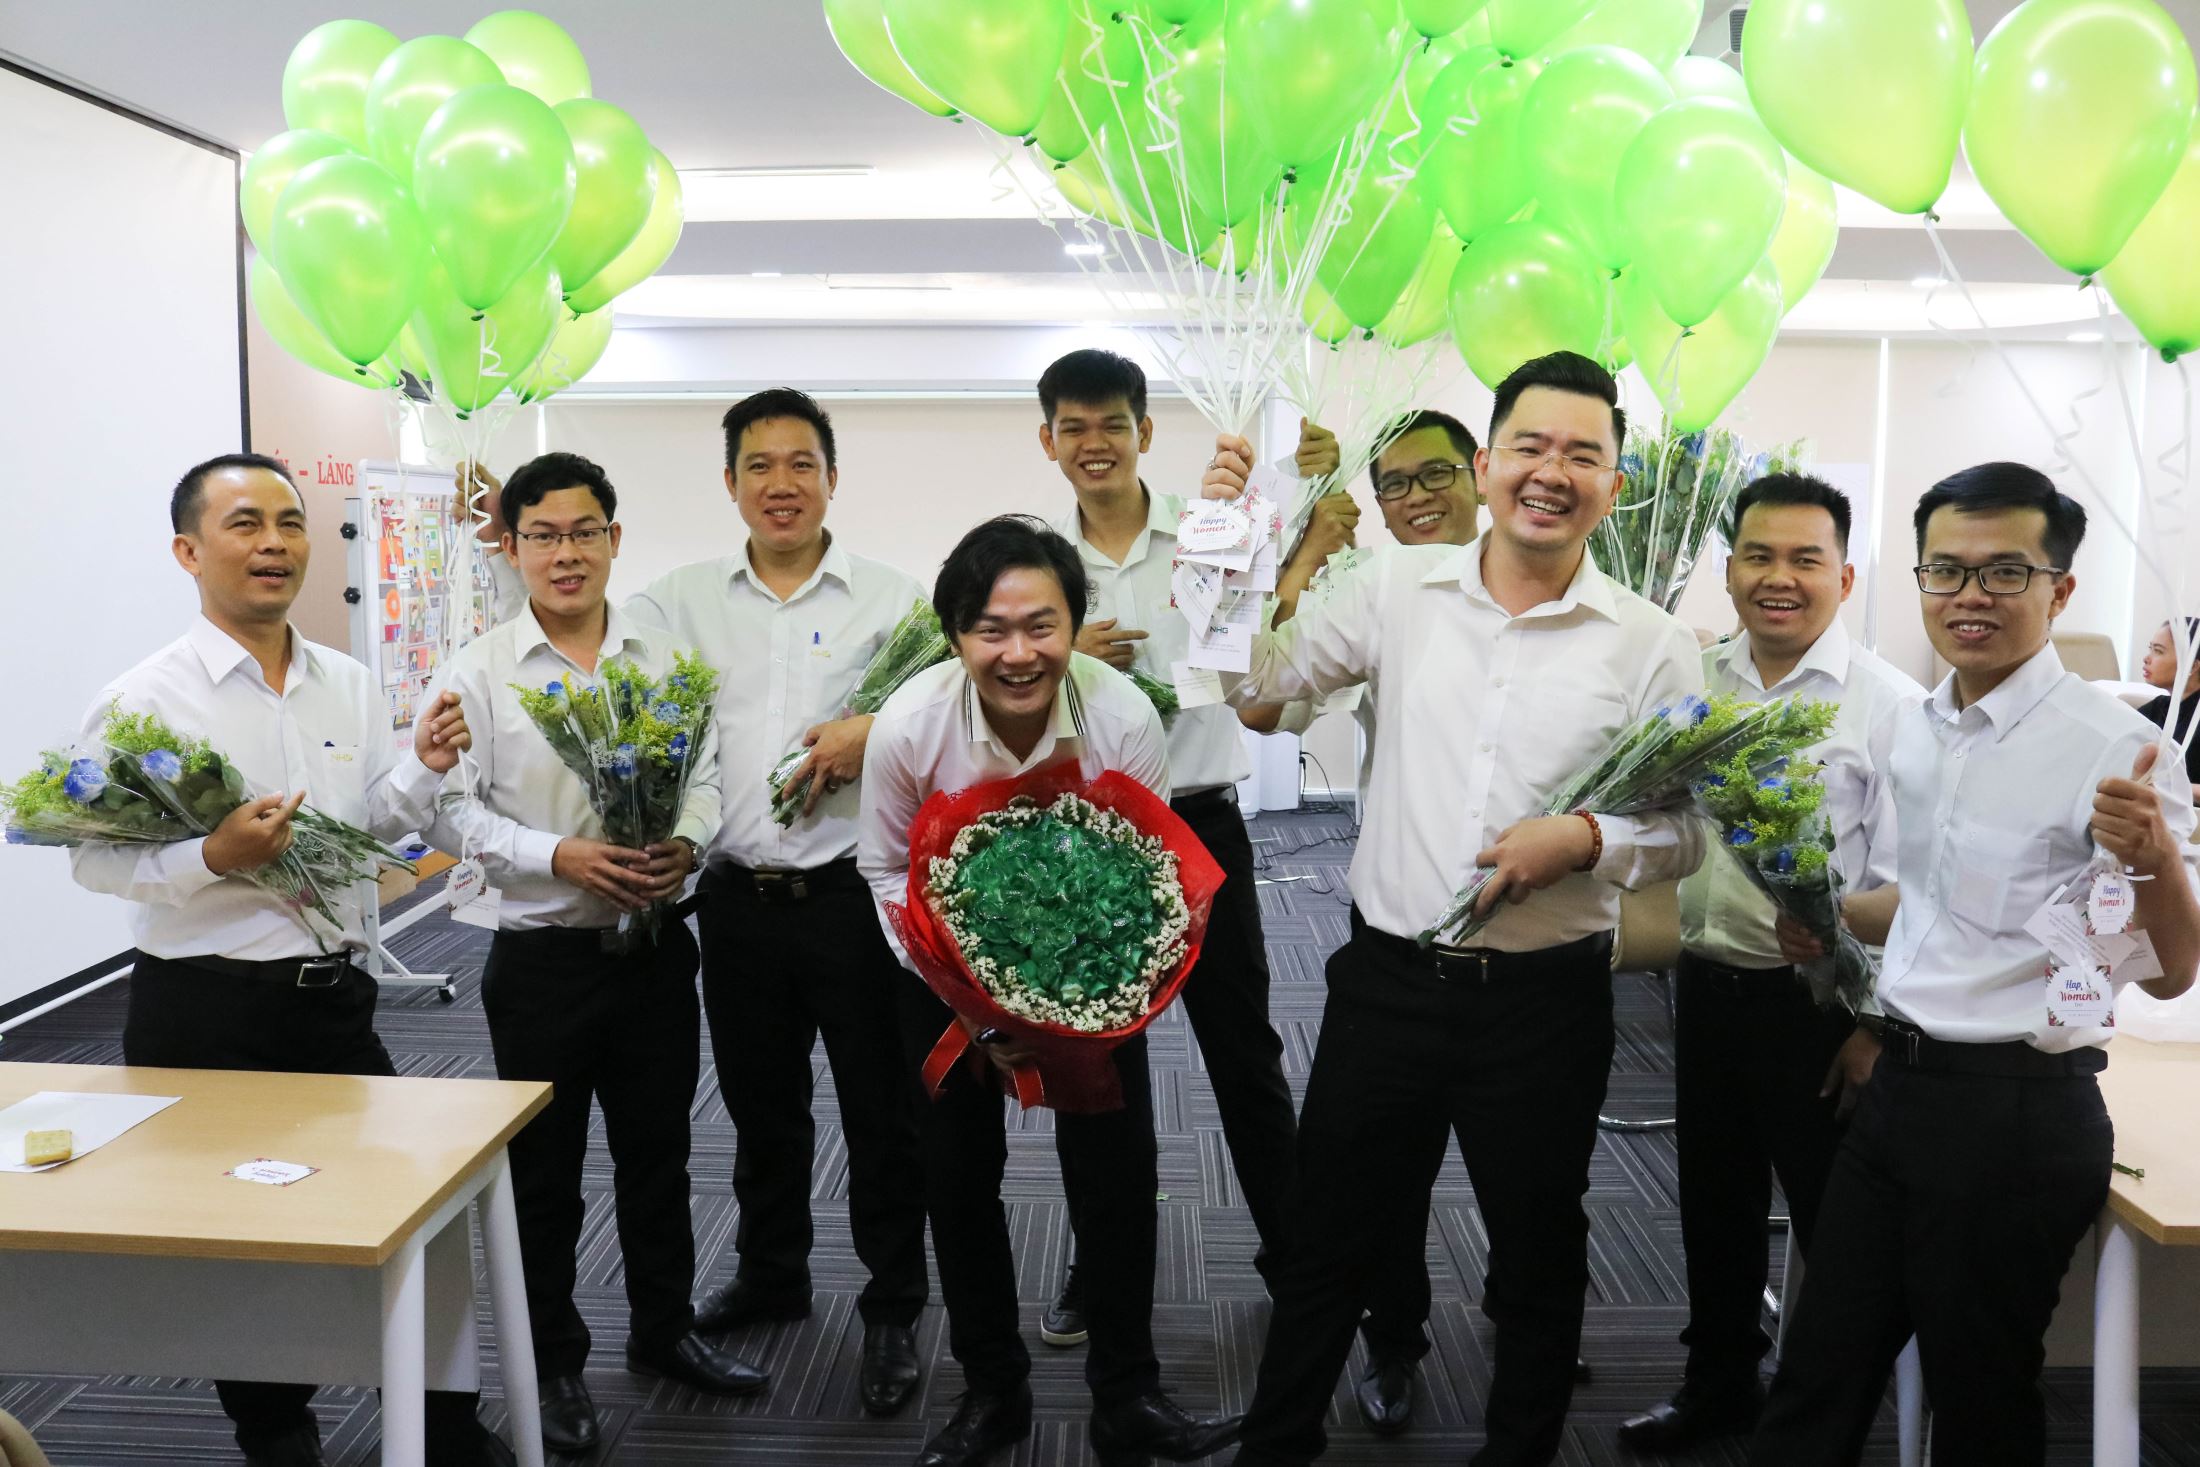 To prepare for this special day, all the male staff has elaborately decorated the office with green balloons attached with various wishes for the female